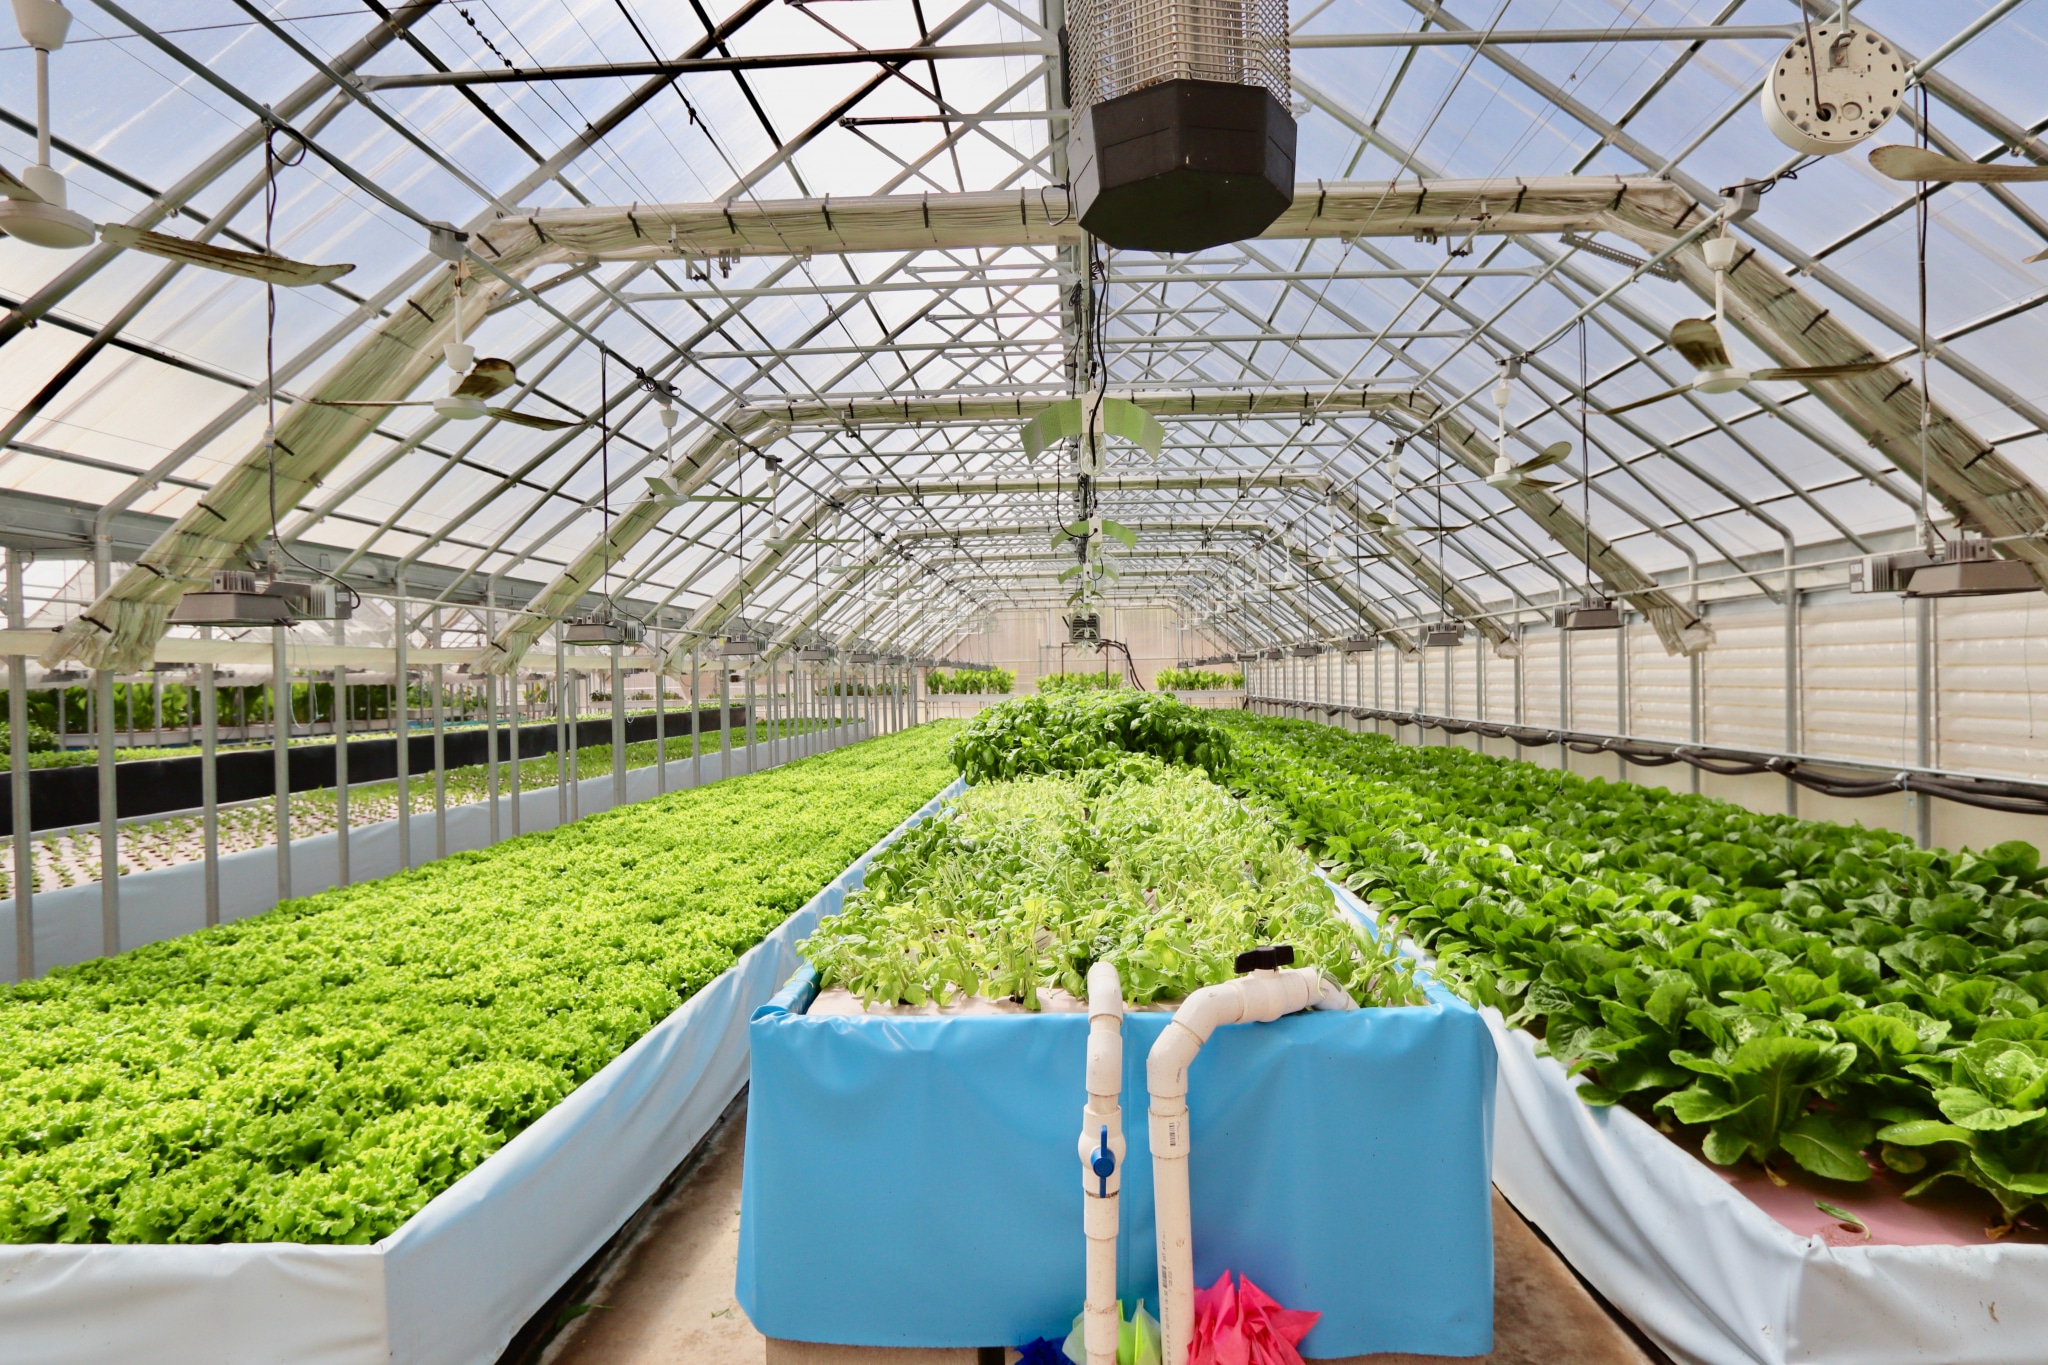 Rows of crisp lettuce and giant, Italian basil in one of the fully automated greenhouses at Southern Organics in Colombiana. The tanks are filled with nutrient rich water, and the plants sit on top of foam board with holes for the roots to submerge in water. The entire greenhouse is run by sensors and a fully automated system, controlling the light, humidity and temperature to create the perfect growing conditions. (Photo by Christine Hull for Bham Now) 